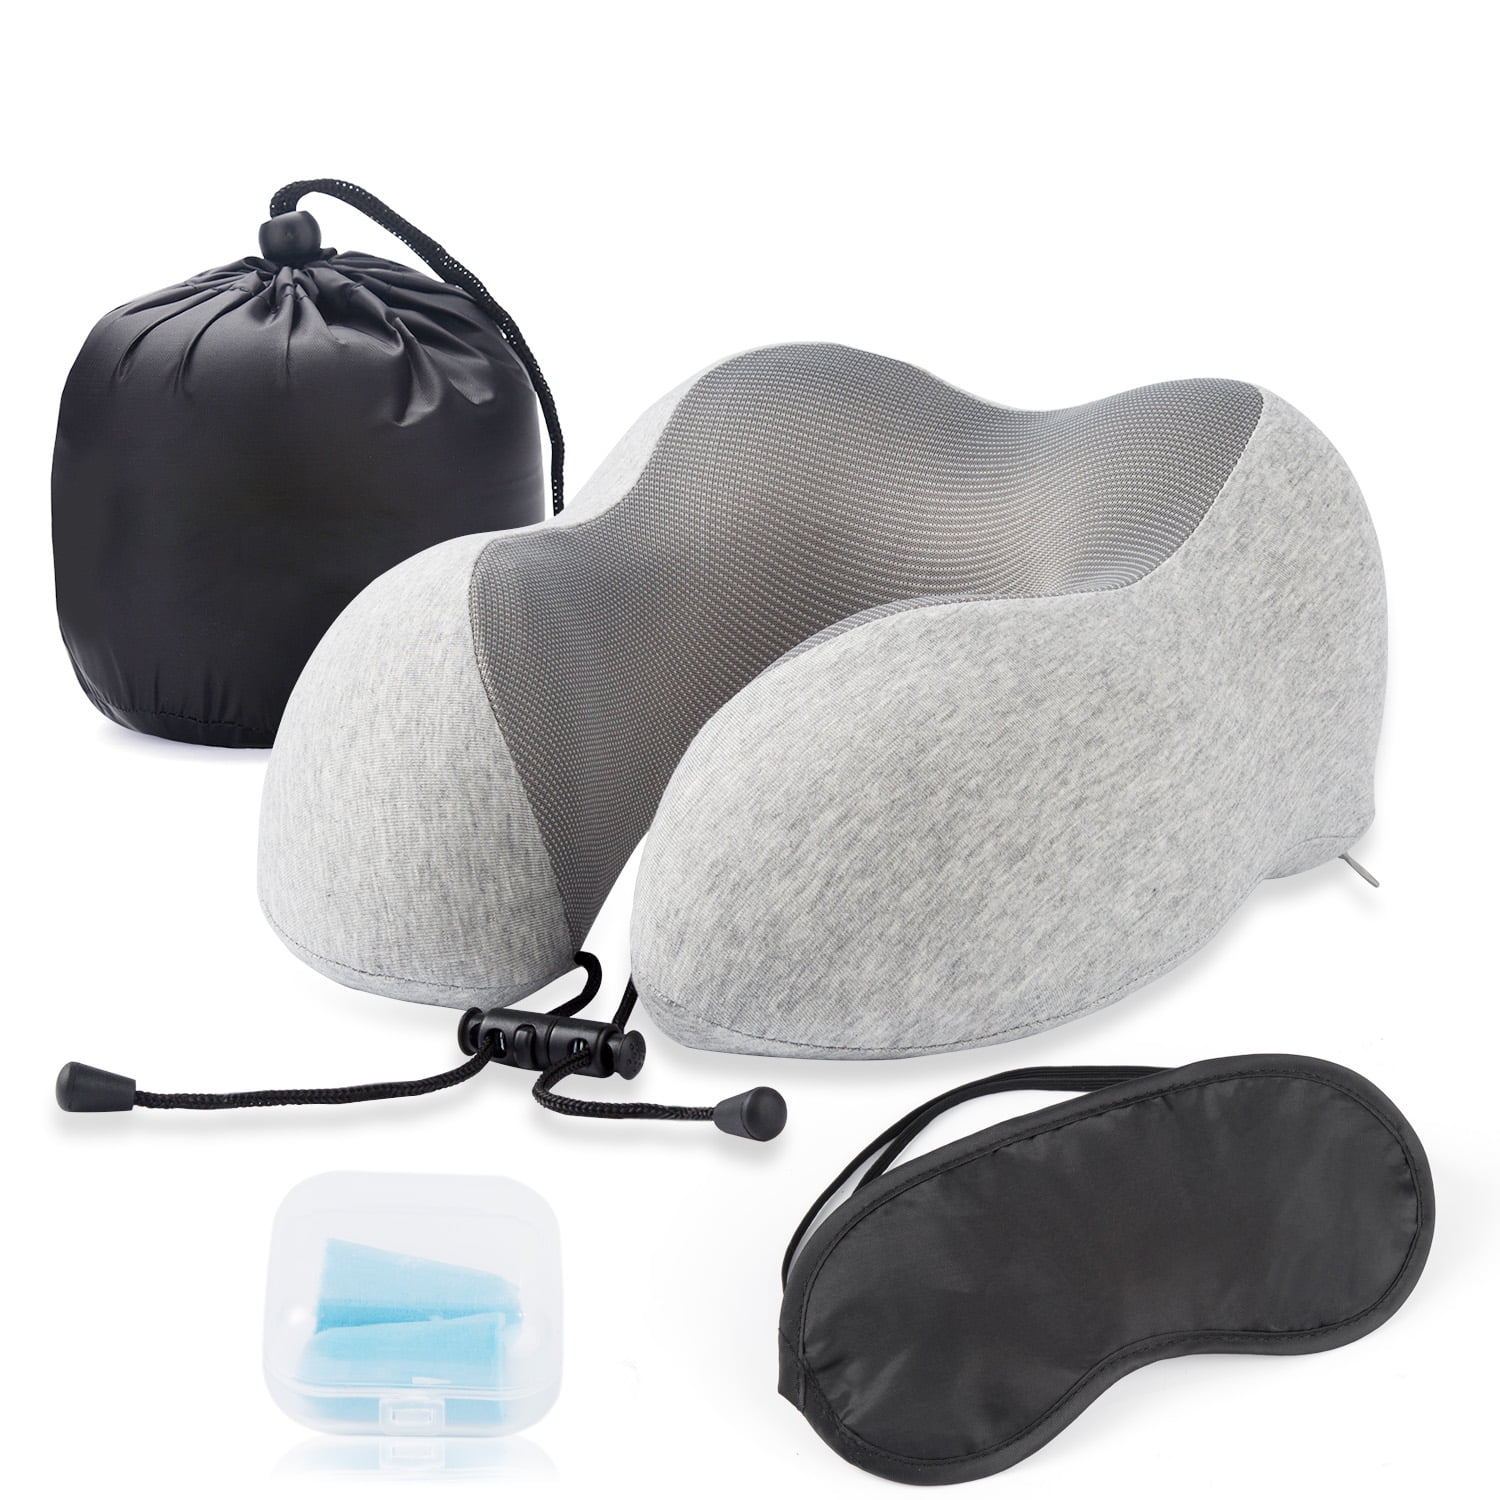 milZZZ Travel Neck Pillow-Comfortable and Lightweight 100% Memory Foam Travel Pillow-Airplane Car and Home/Office Pillow-Machine Washable Cover-Travel Kit Includes Earplugs Eye Mask and Travel Bag